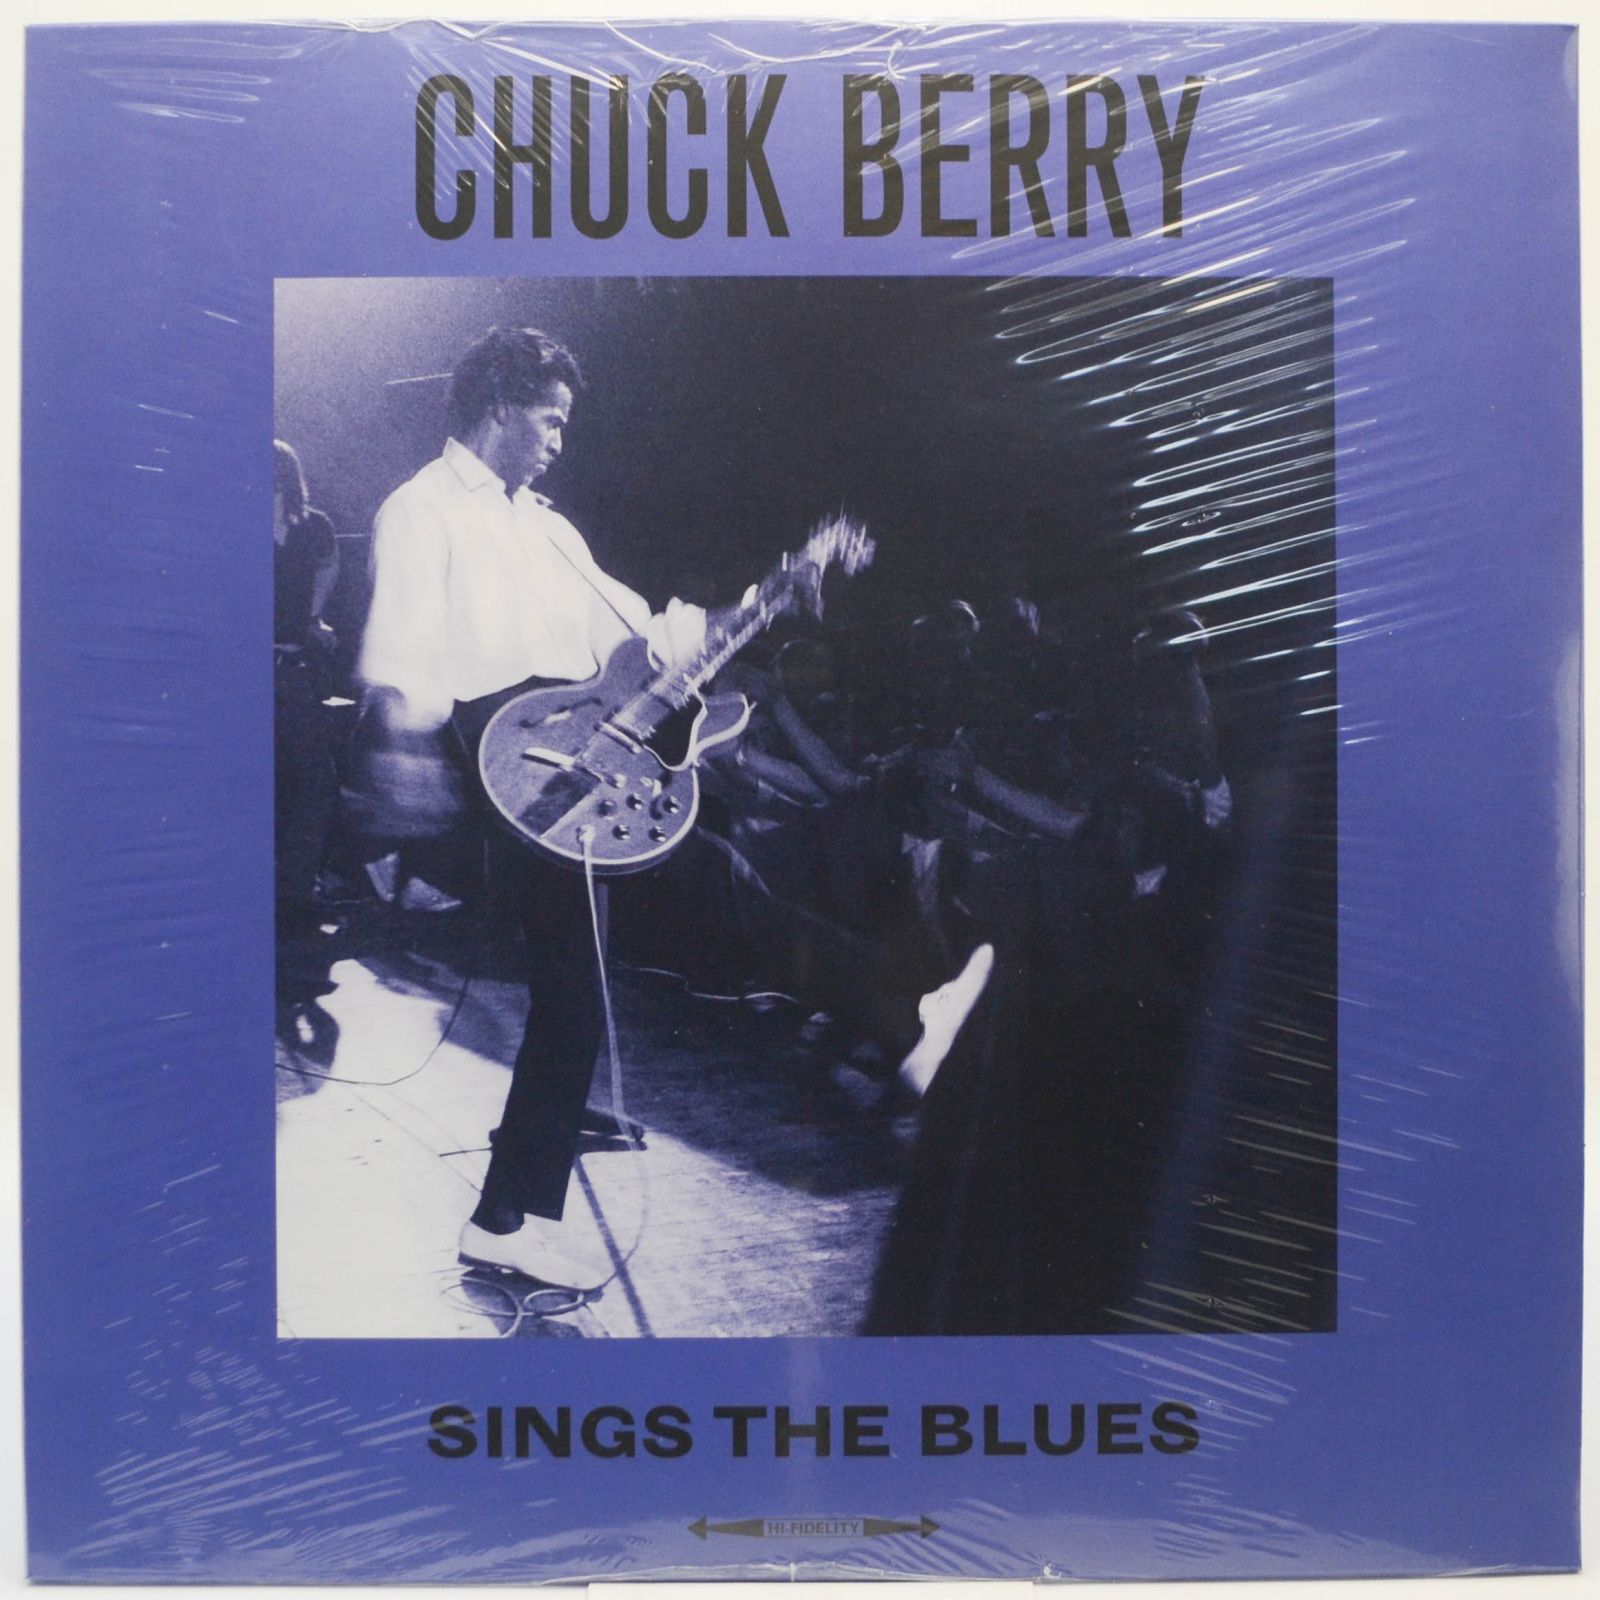 Chuck Berry — Sings The Blues, 2015